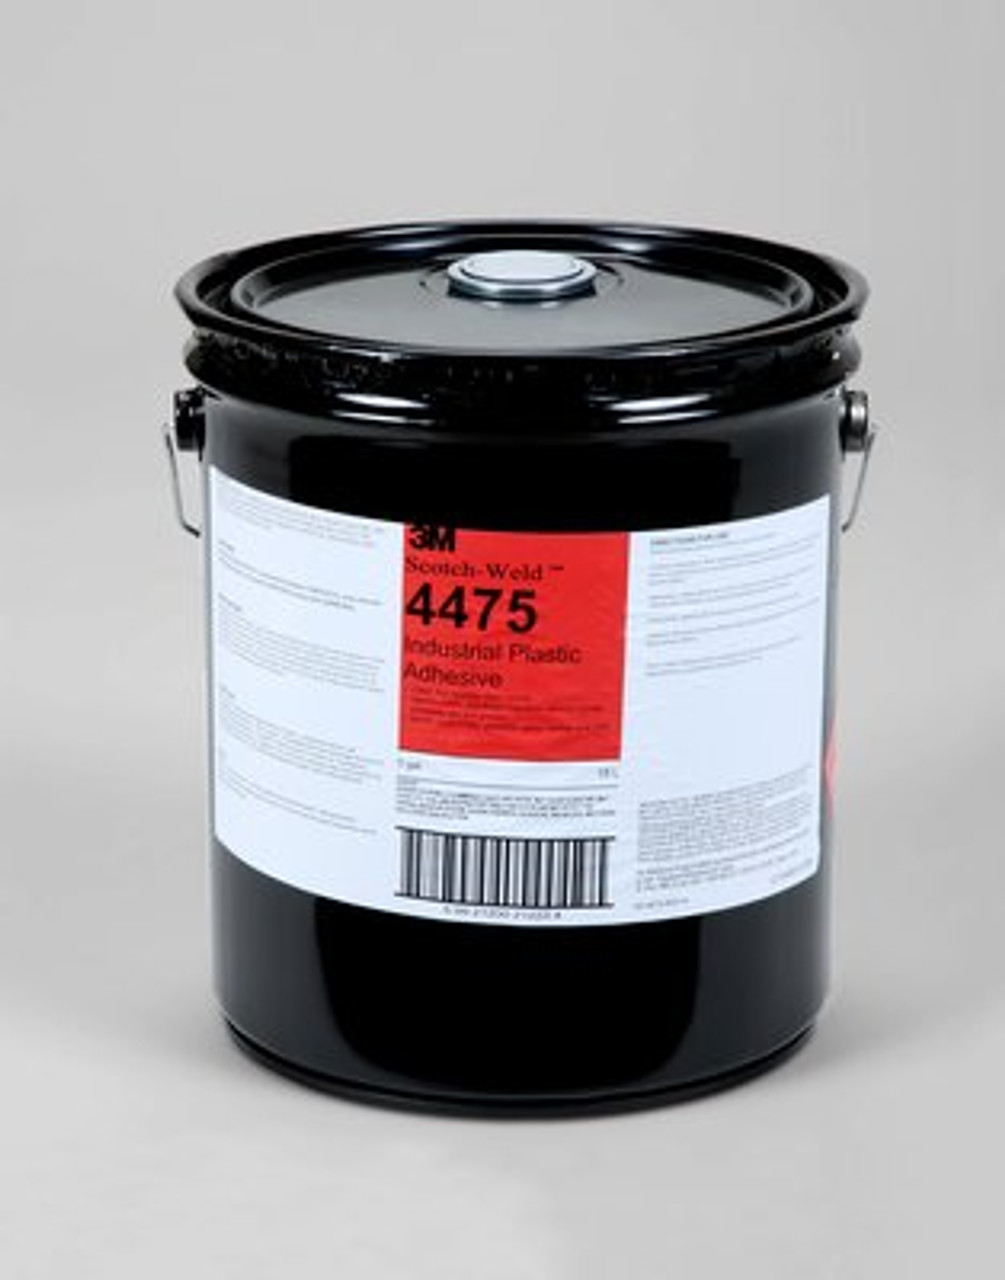 3M™ Industrial Plastic Adhesive 4475, Clear, 5 Gallon Pail